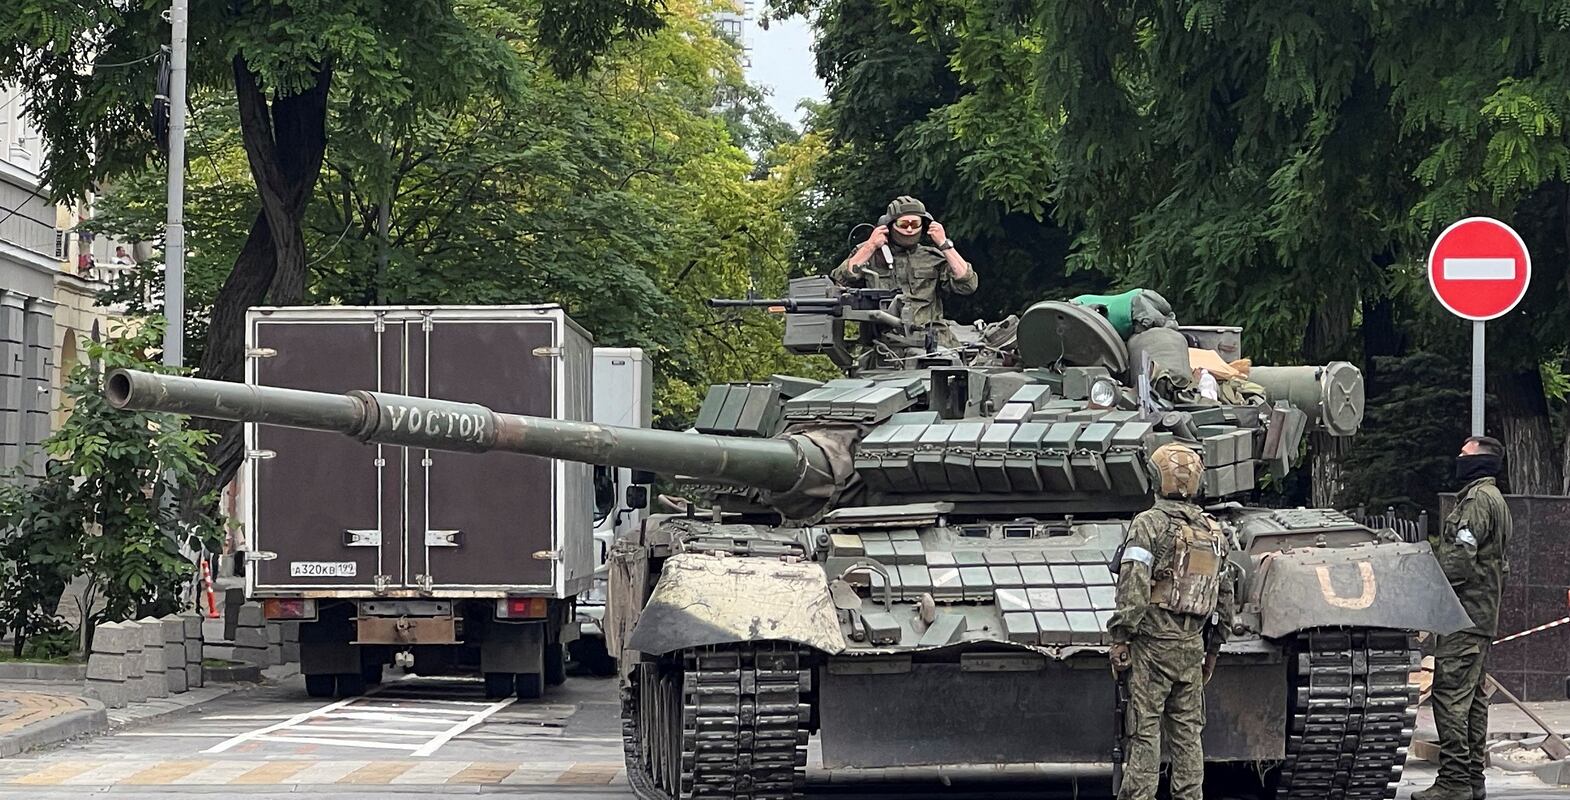 Fighters of Wagner private mercenary group are seen in a street near the headquarters of the Southern Military District in the city of Rostov-on-Don, Russia, June 24, 2023. REUTERS/Stringer